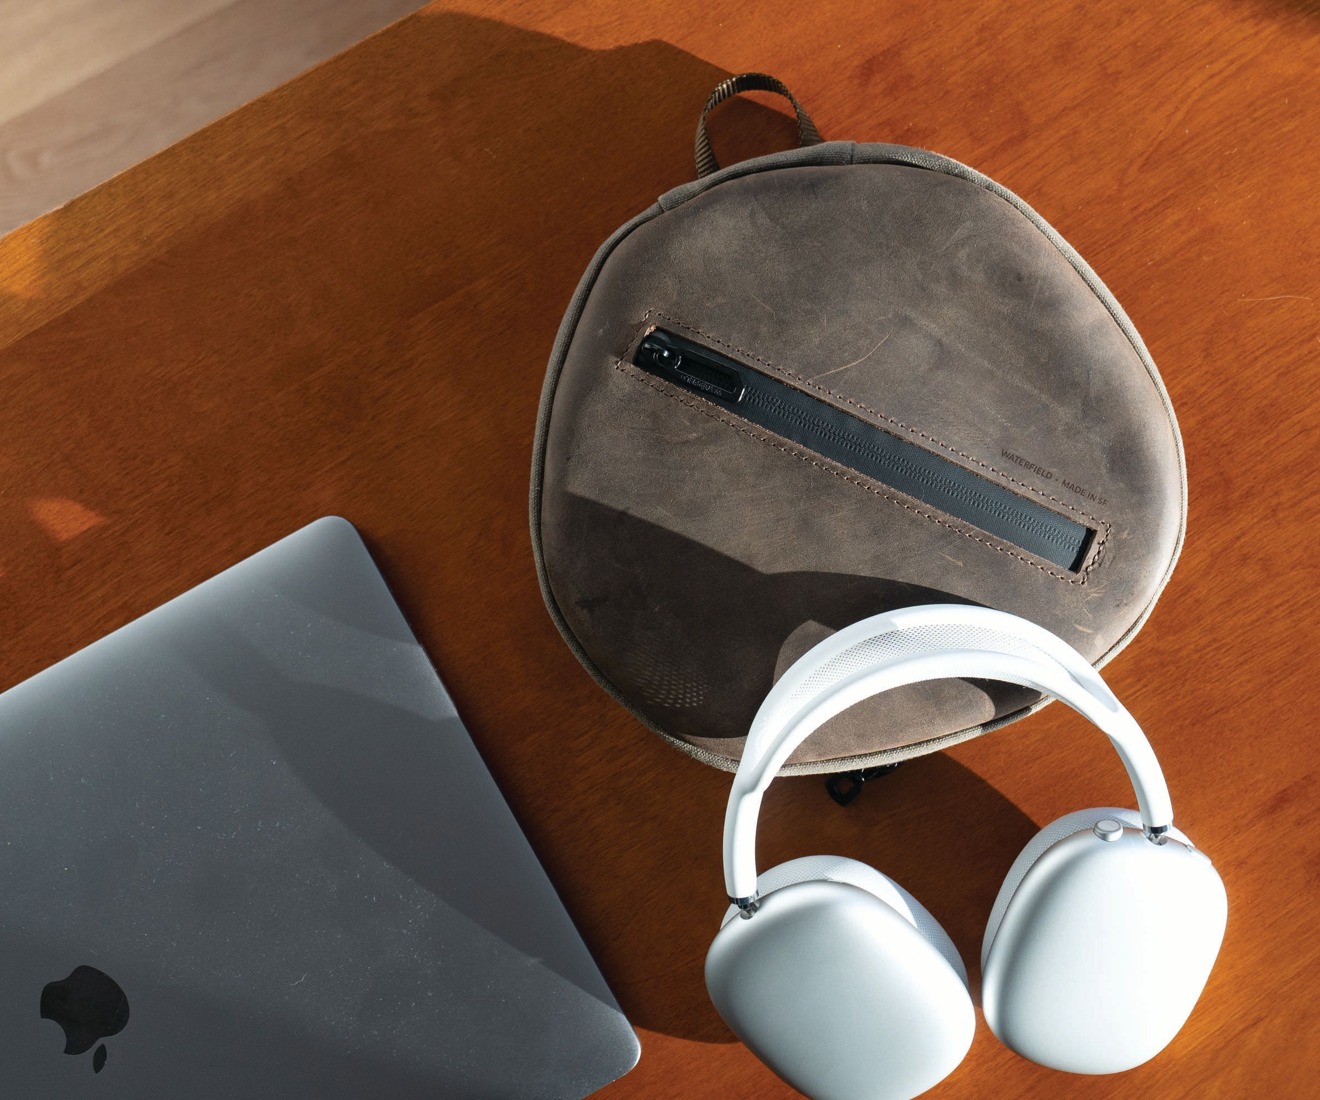 Waterfield Designs' AirPods Max case actually protects your headphones